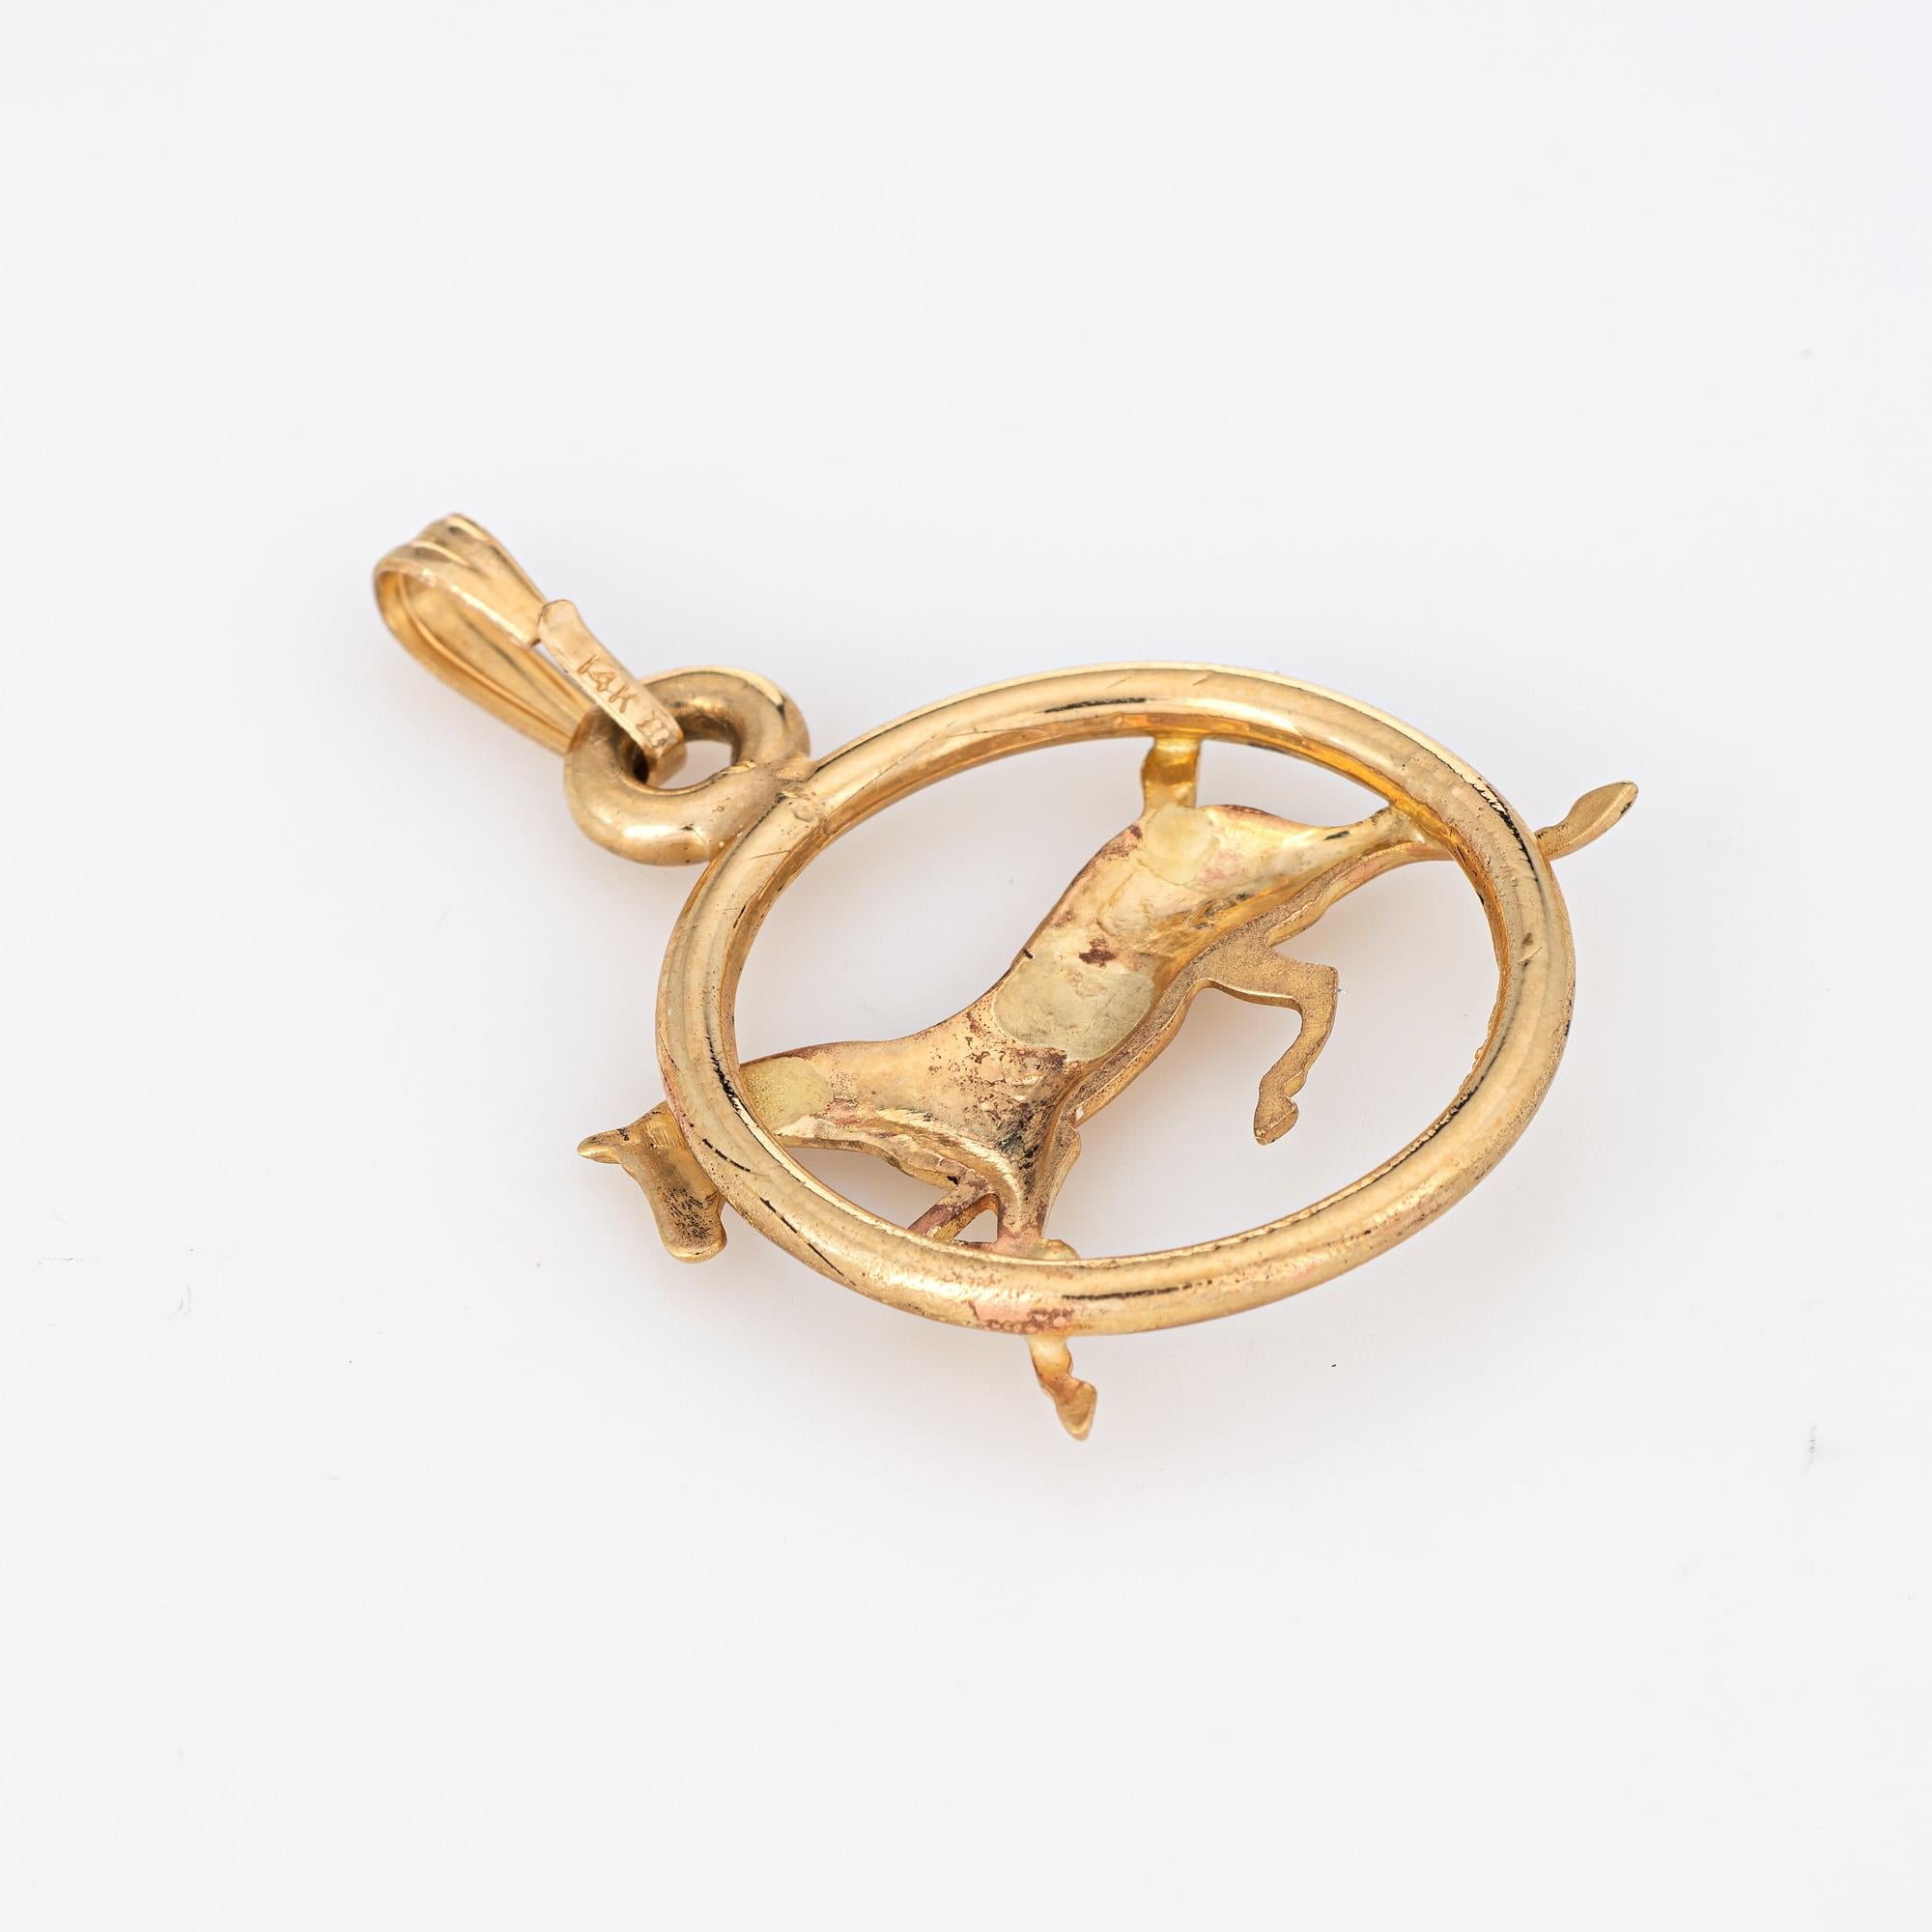 Finely detailed vintage horse charm crafted in 14k yellow gold.  

The sweet charm features a trotting horse set within a circular mount. The piece can be worn as a charm on a bracelet or as a pendant.

The charm is in very good condition and was